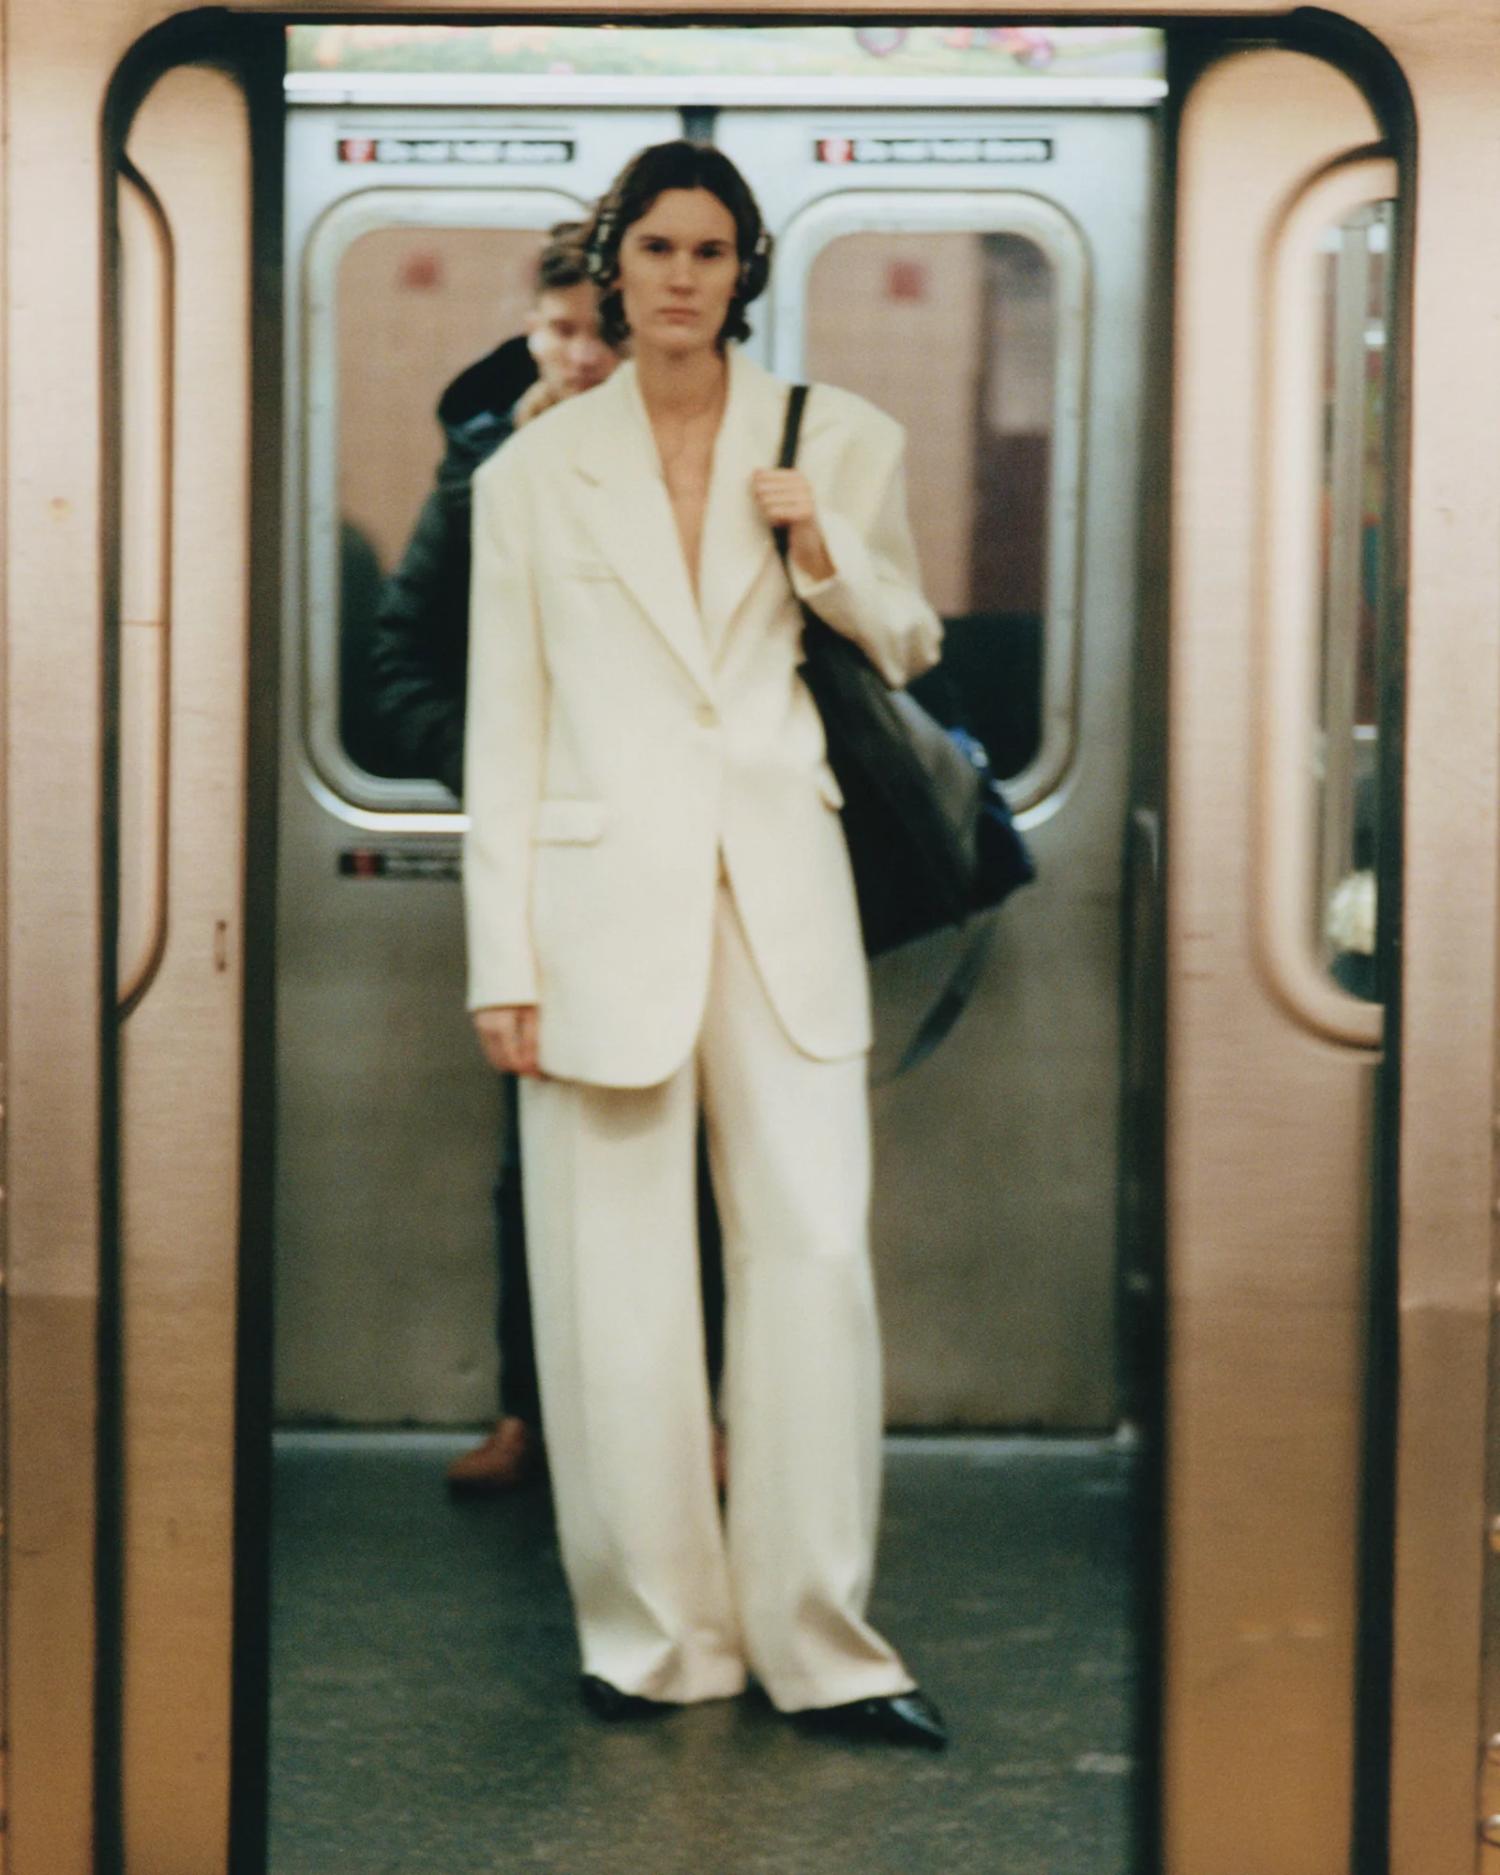 Jamily Wernke Meurer in New York City wearing The Frankie Shop styled by Elly McGaw